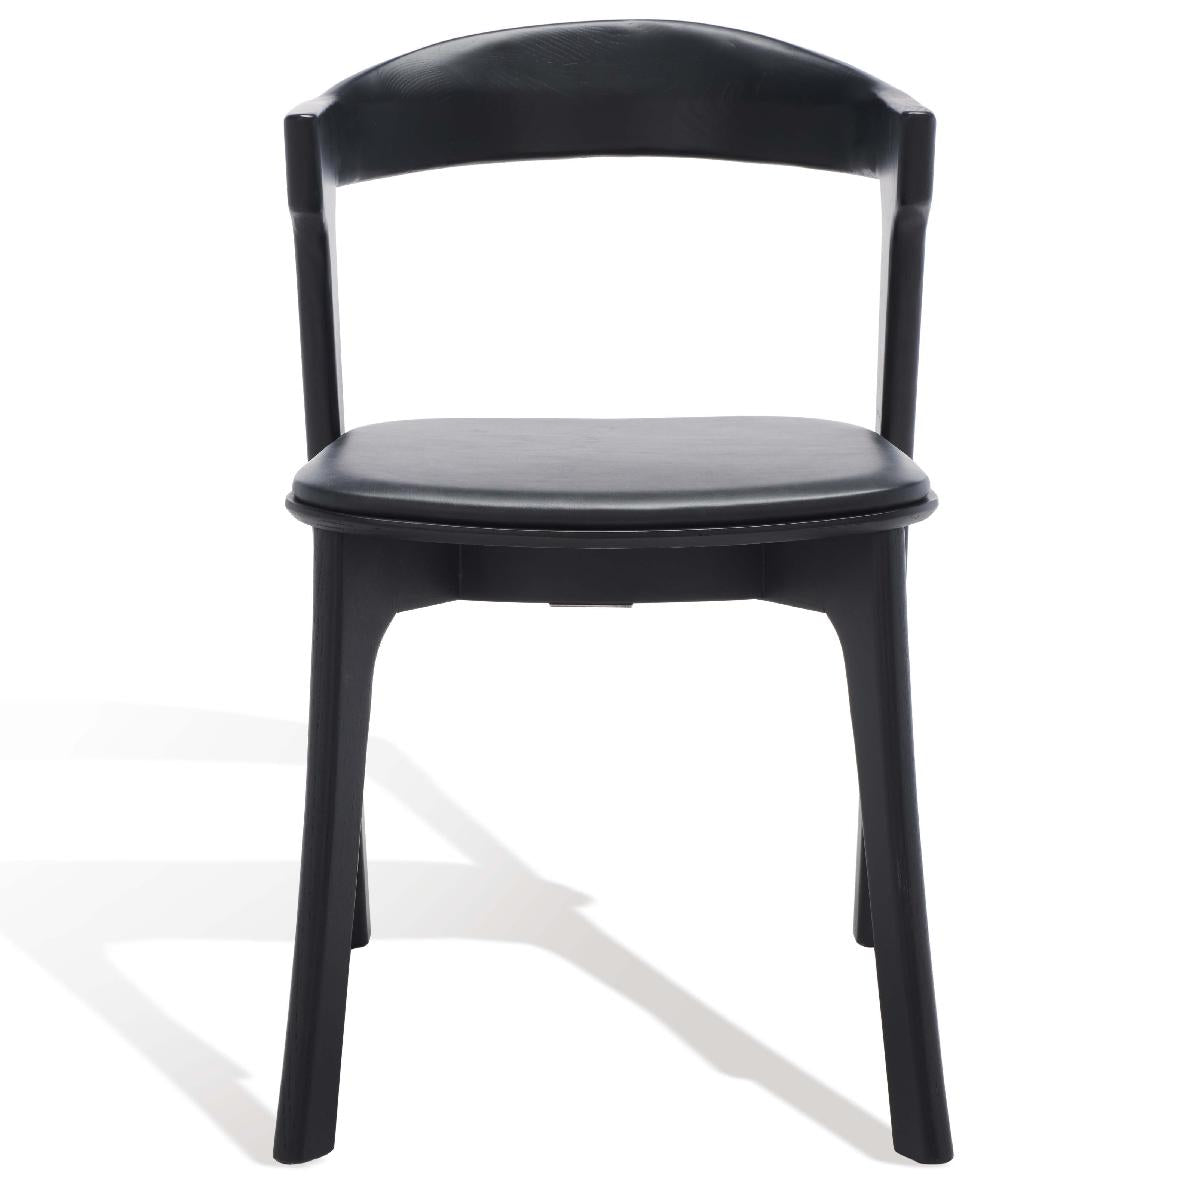 Safavieh Couture Brylie Wood And Leather Dining Chair(Set of 2) , SFV4126 - Black